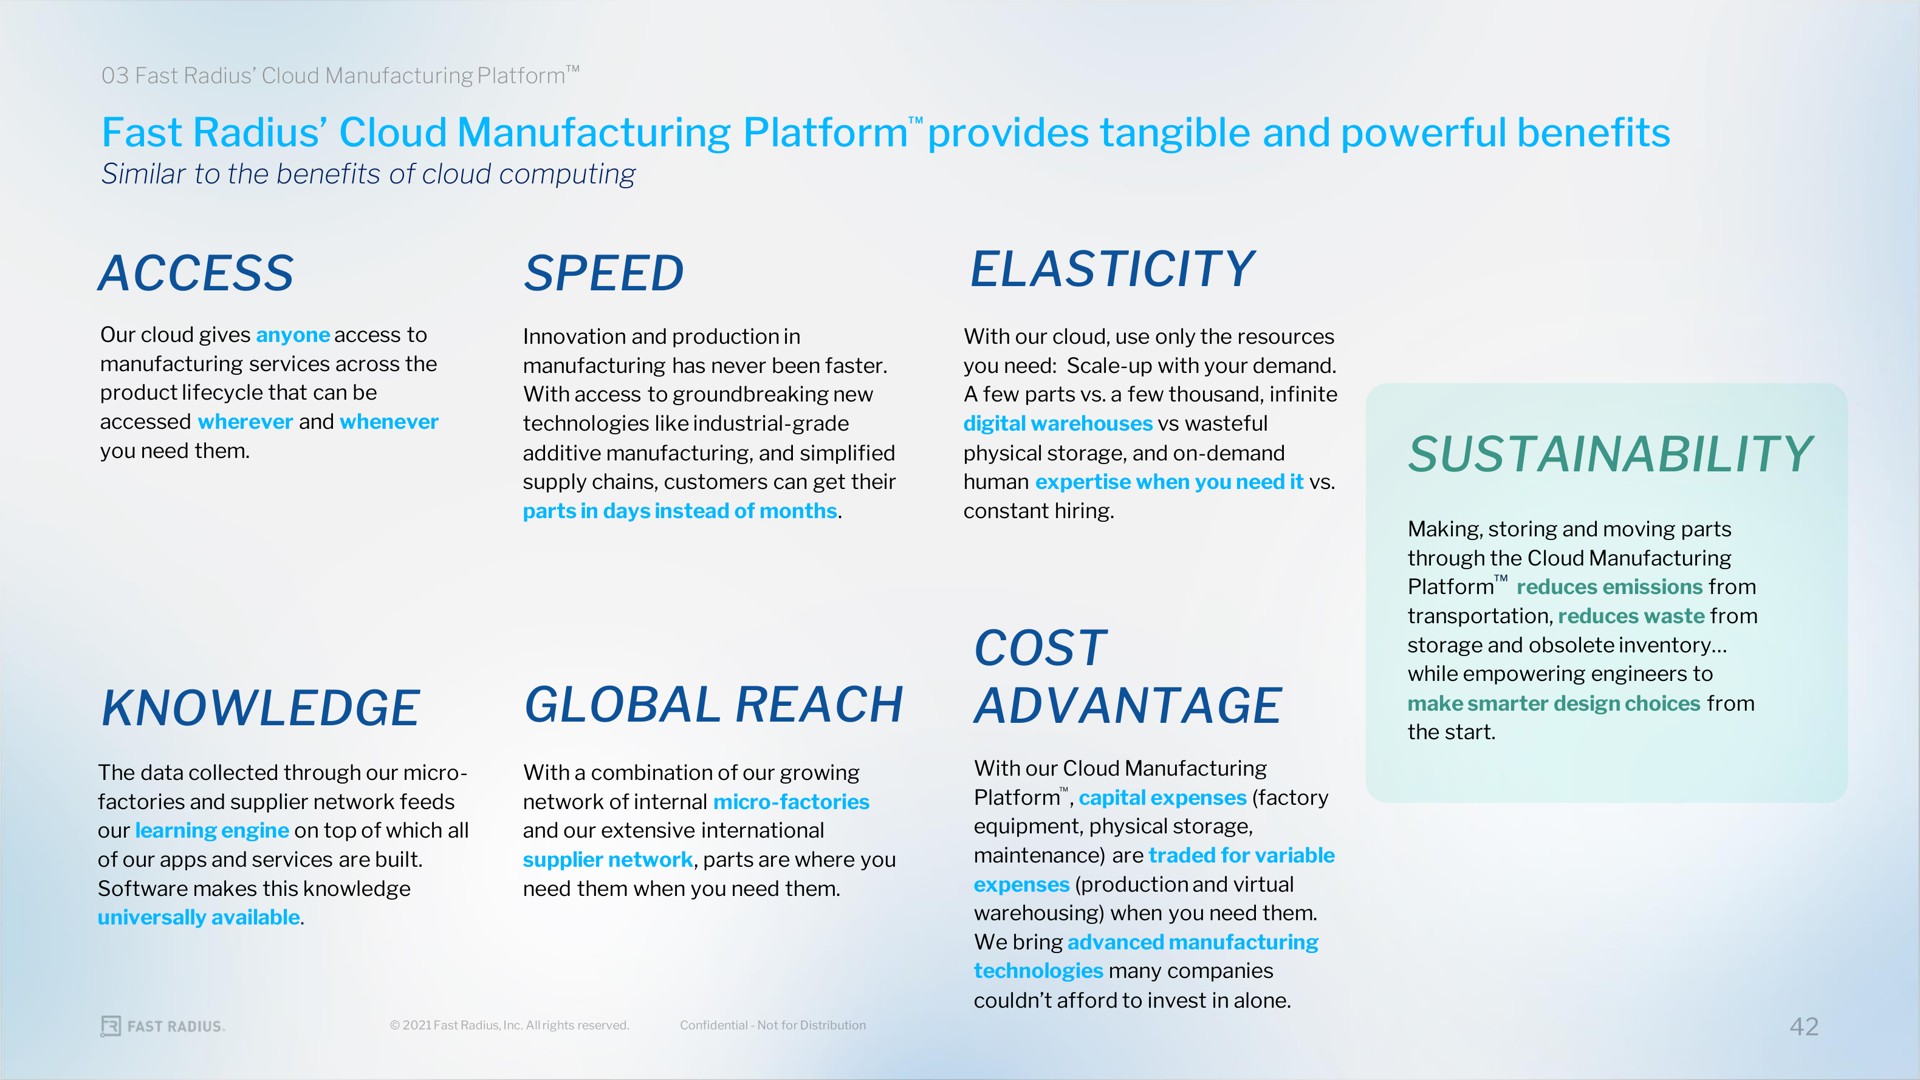 fast radius cloud manufacturing platform provides tangible and powerful benefits access speed elasticity knowledge global reach cost advantage | Fast Radius